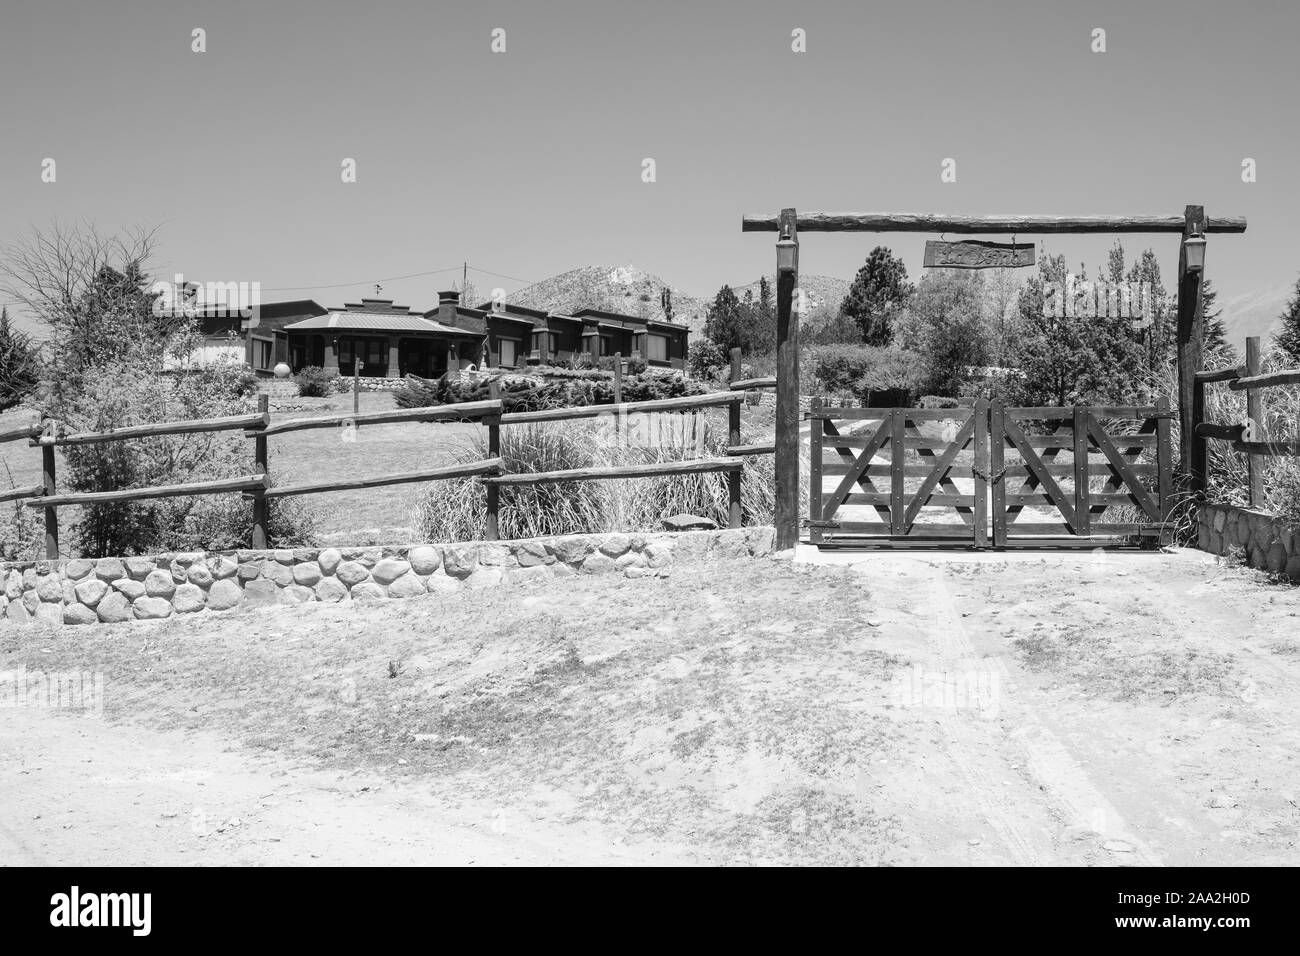 High standard property in Tafí del Valle, Argentina in classic black and white Stock Photo